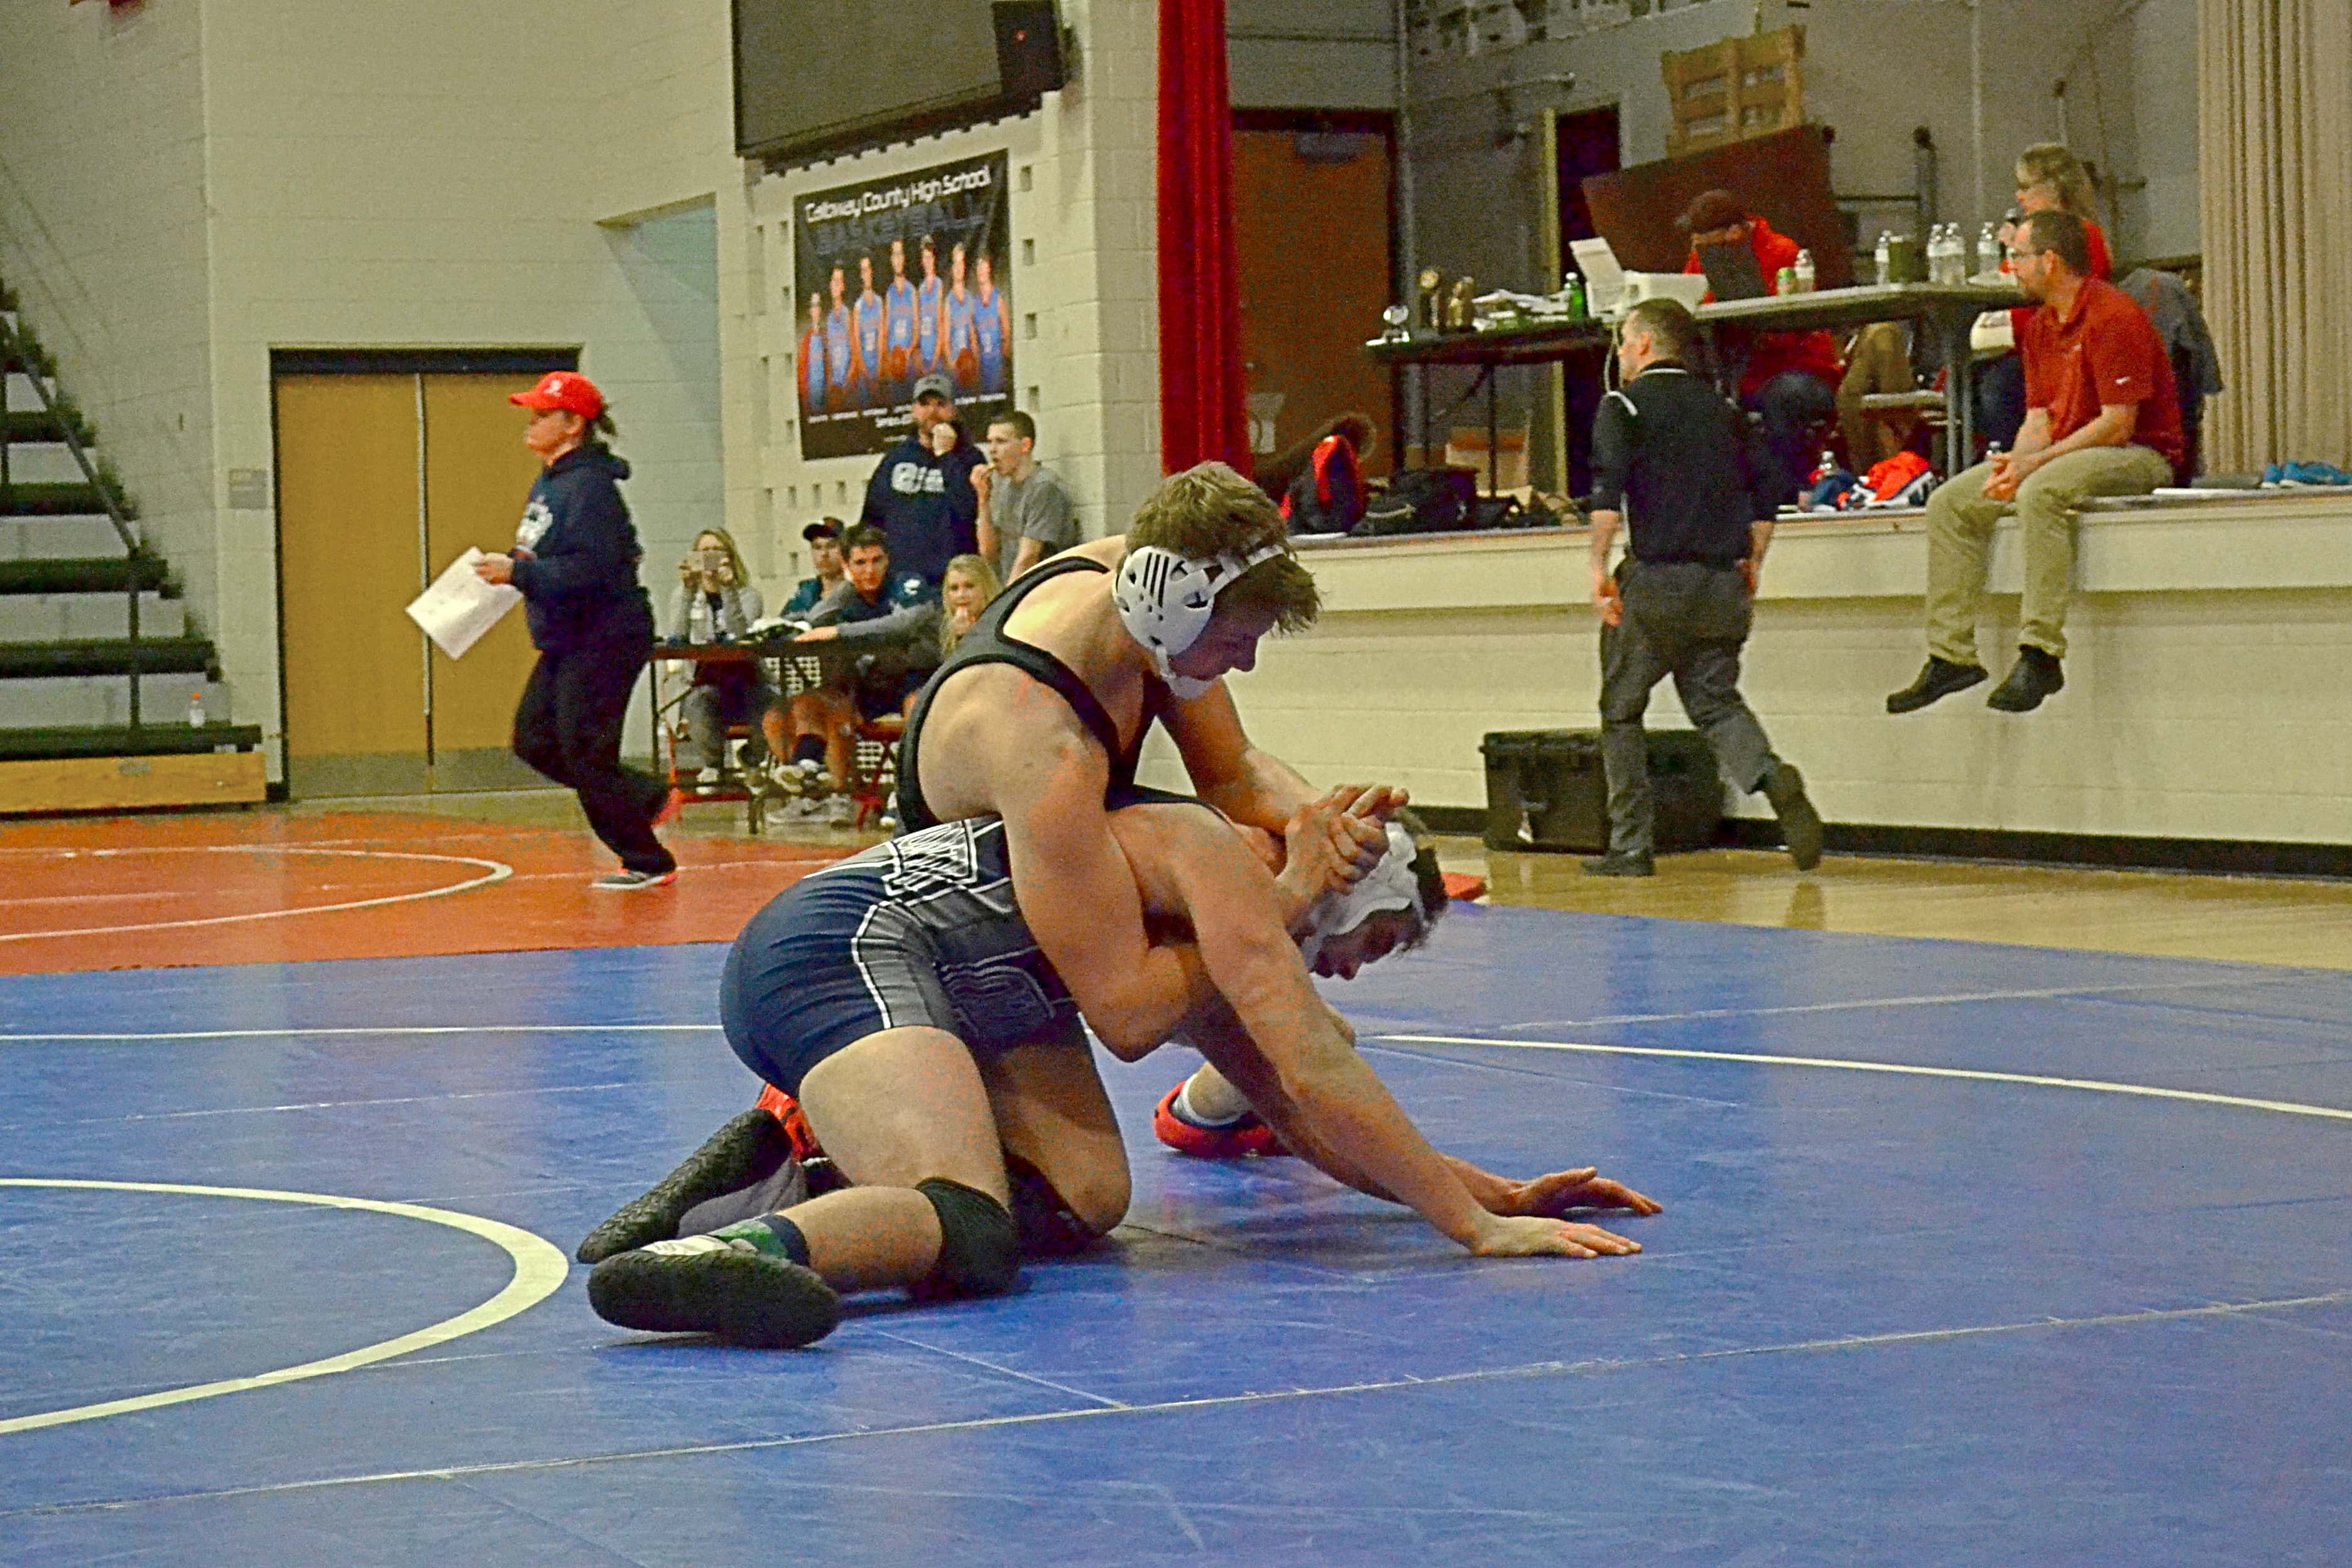 Stevens and Nicodemus met in the finals at Calloway County's 2018 Laker Invitational.